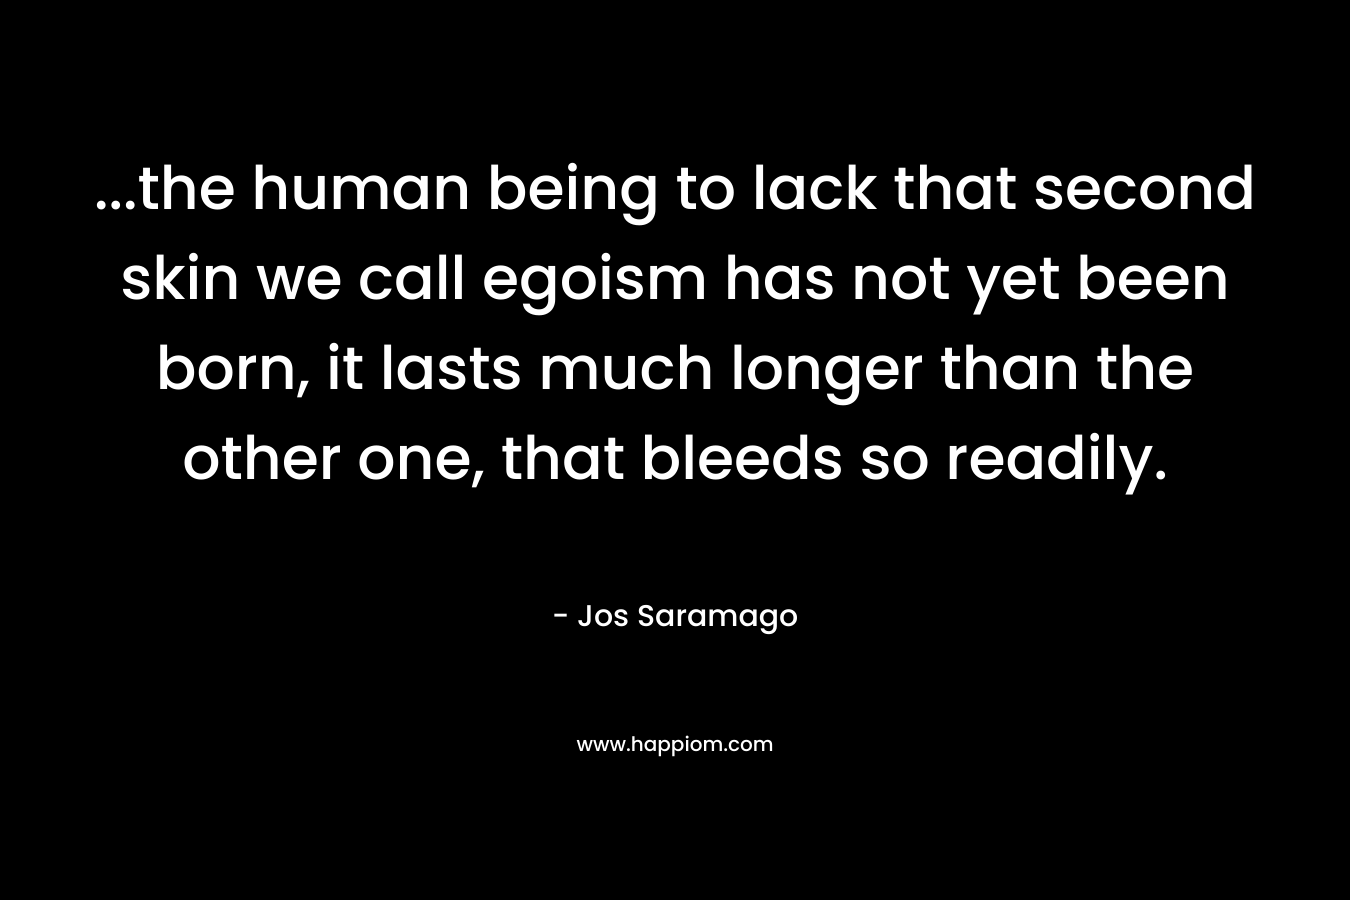 …the human being to lack that second skin we call egoism has not yet been born, it lasts much longer than the other one, that bleeds so readily. – Jos Saramago